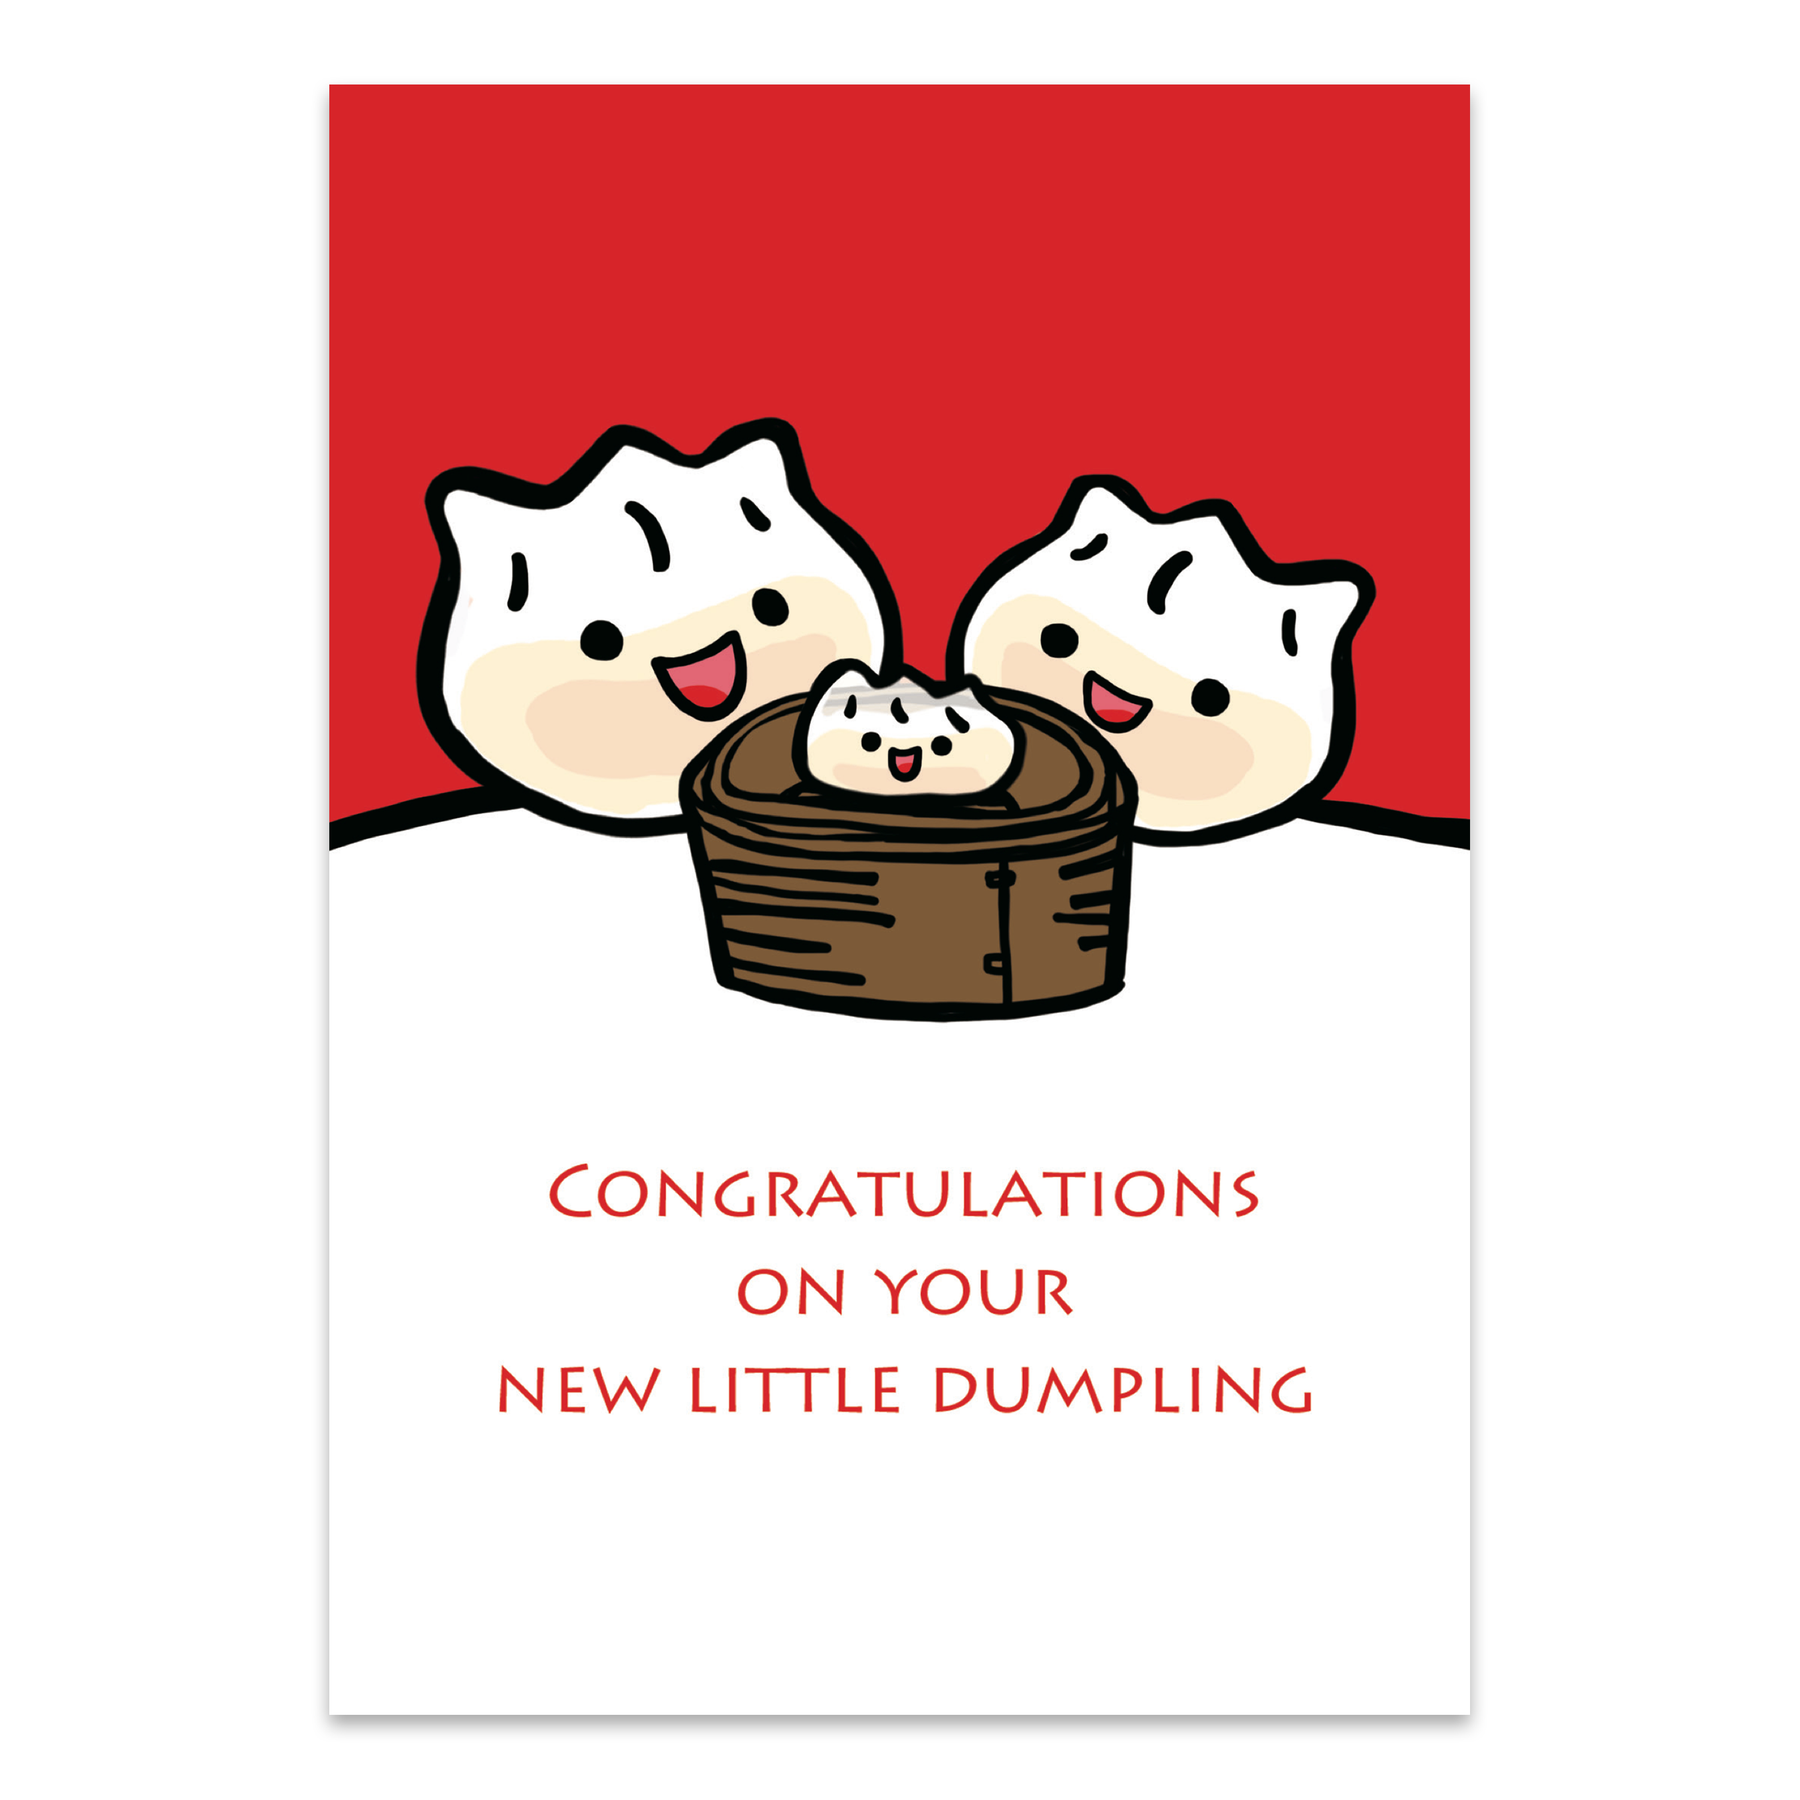 GREETING CARD: Congratulations on Your New Little Dumpling!